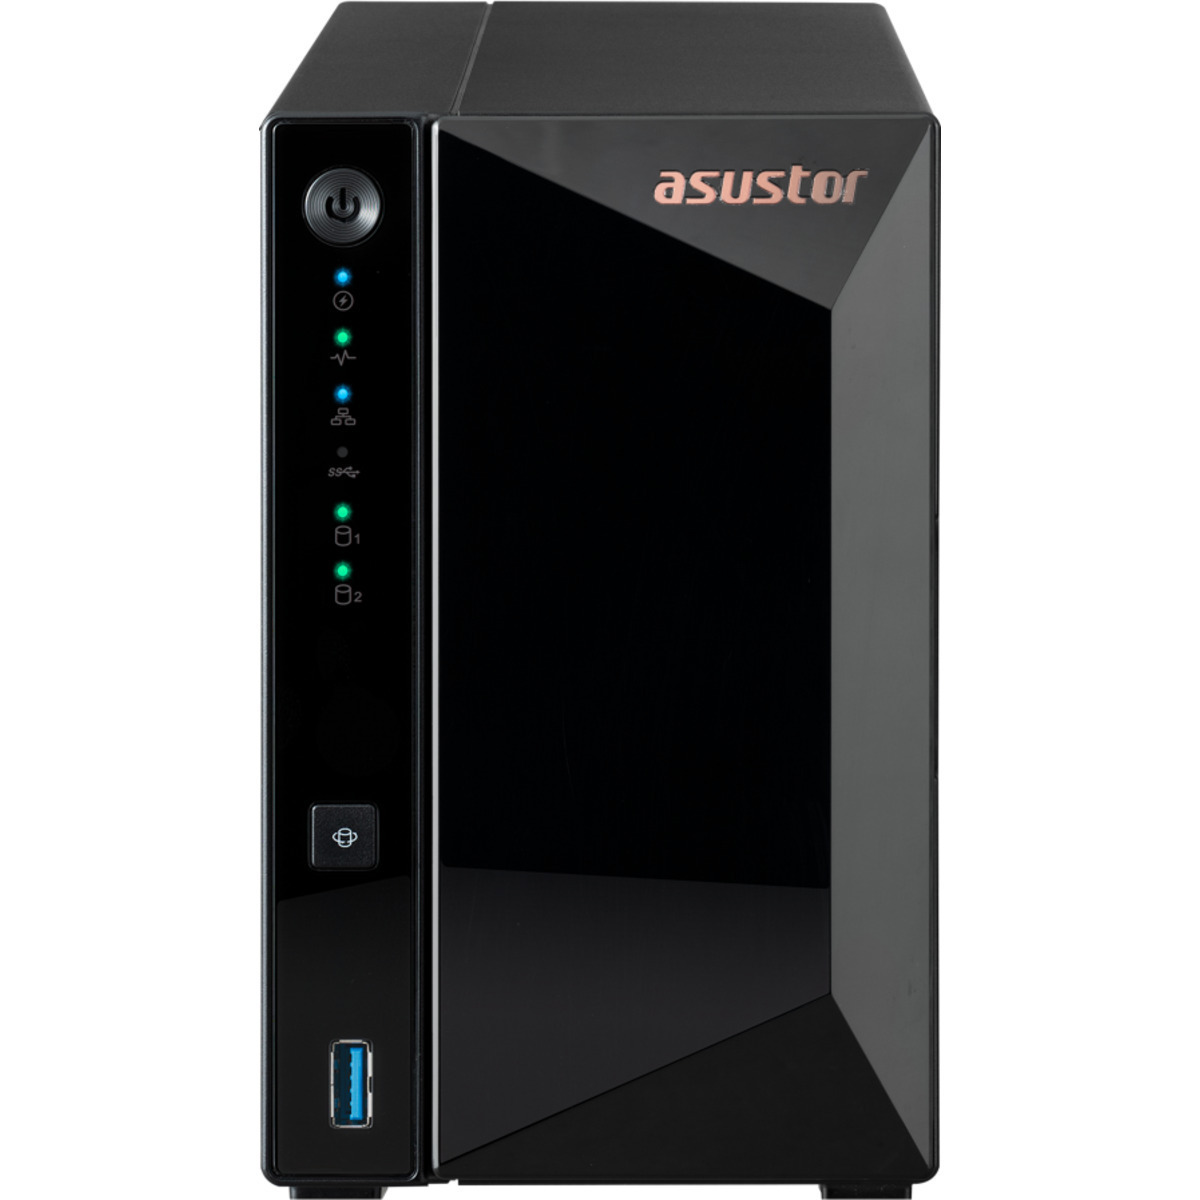 ASUSTOR DRIVESTOR 2 Pro AS3302T 12tb 2-Bay Desktop Personal / Basic Home / Small Office NAS - Network Attached Storage Device 2x6tb Western Digital Red WD60EFAX 3.5 5400rpm SATA 6Gb/s HDD NAS Class Drives Installed - Burn-In Tested DRIVESTOR 2 Pro AS3302T